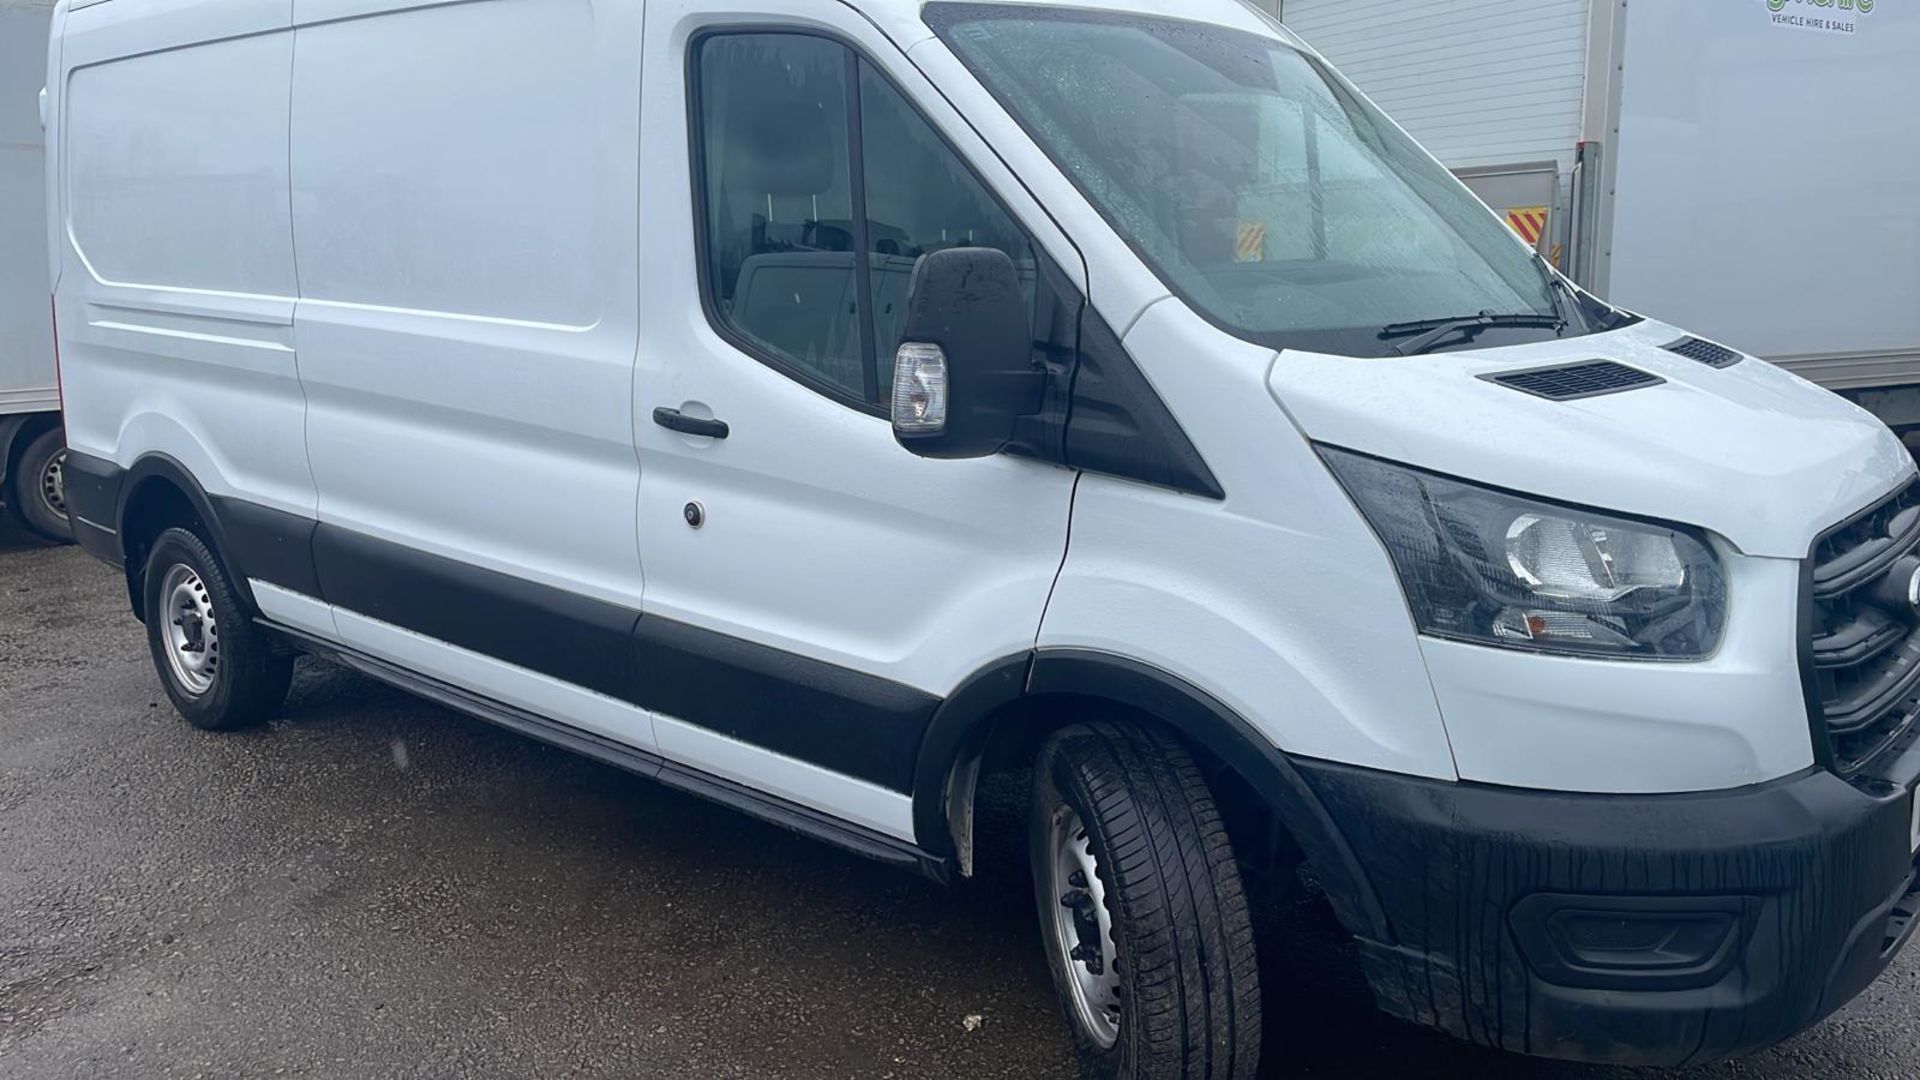 2022 22 PLATE FORD TRANSIT 350 LEADER ECO BLUE PANEL VAN - 24,186 WARRANTED MILES - FWD  - Image 2 of 9